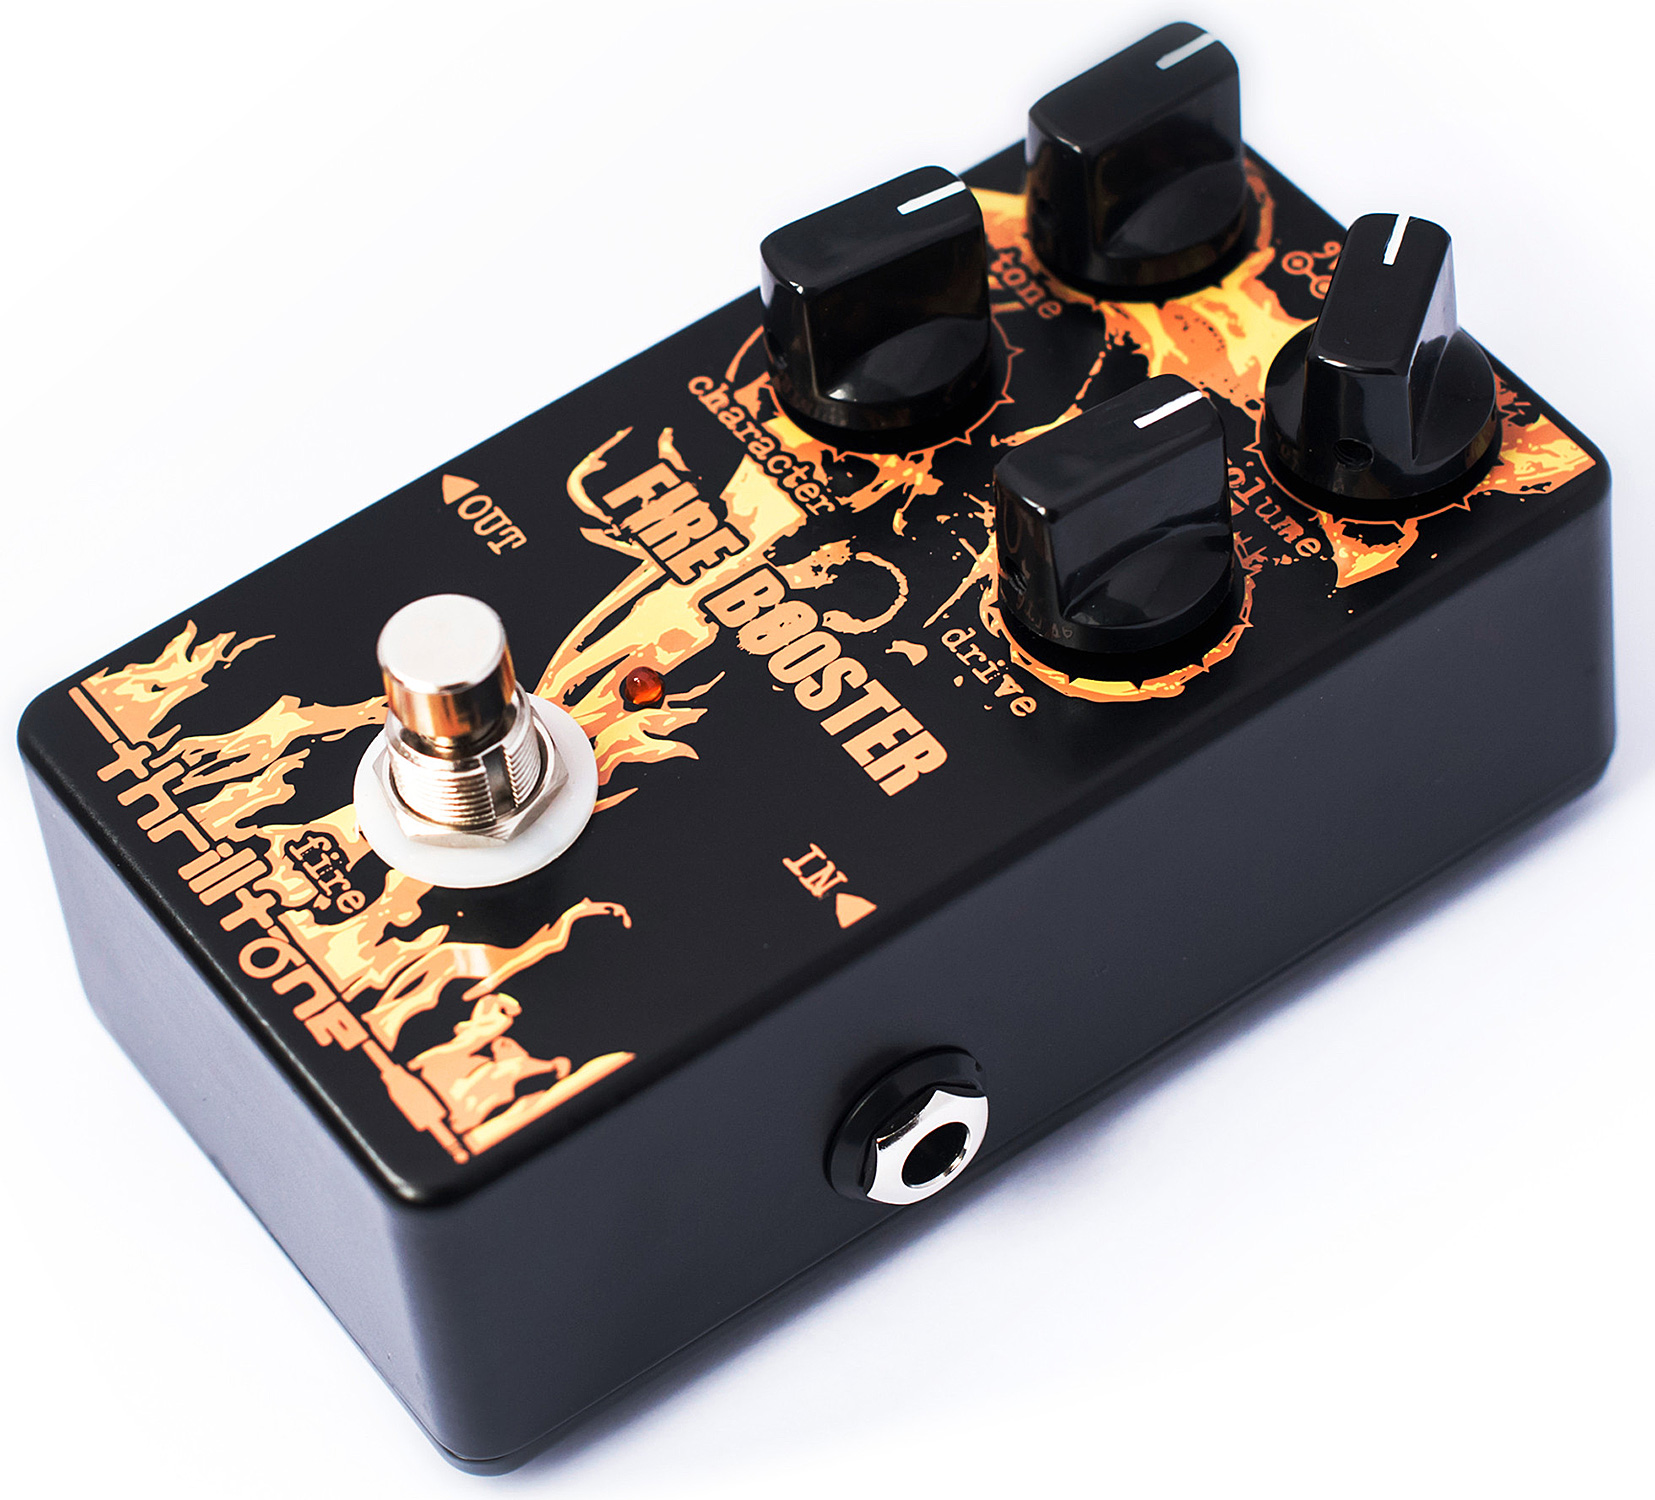 Thrilltone Fire Booster - - Overdrive, distortion & fuzz effect pedal - Variation 2